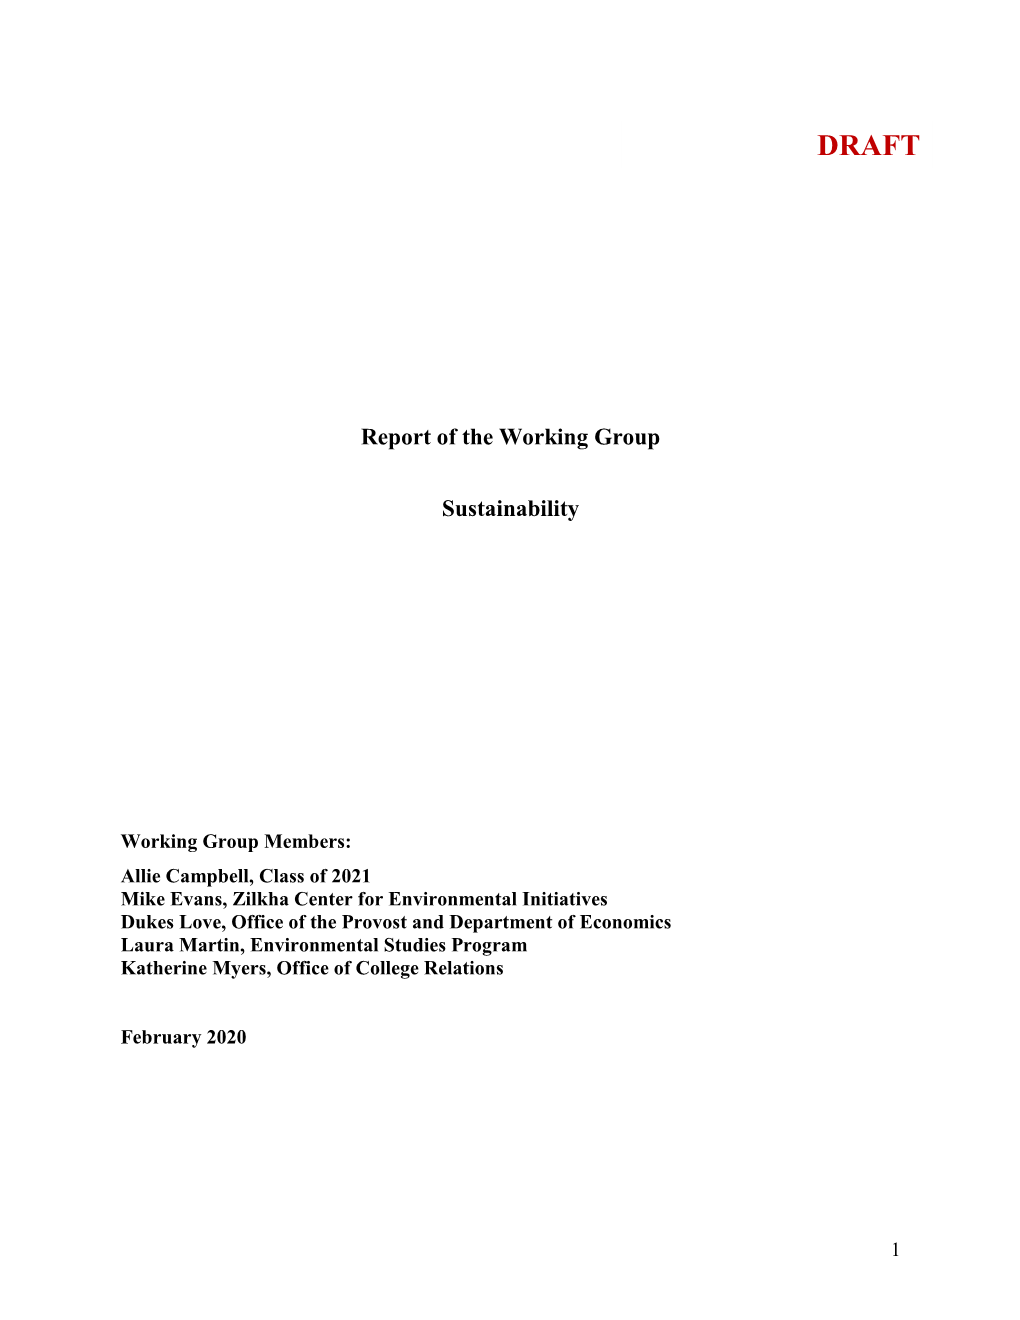 Report of the Working Group on Sustainability